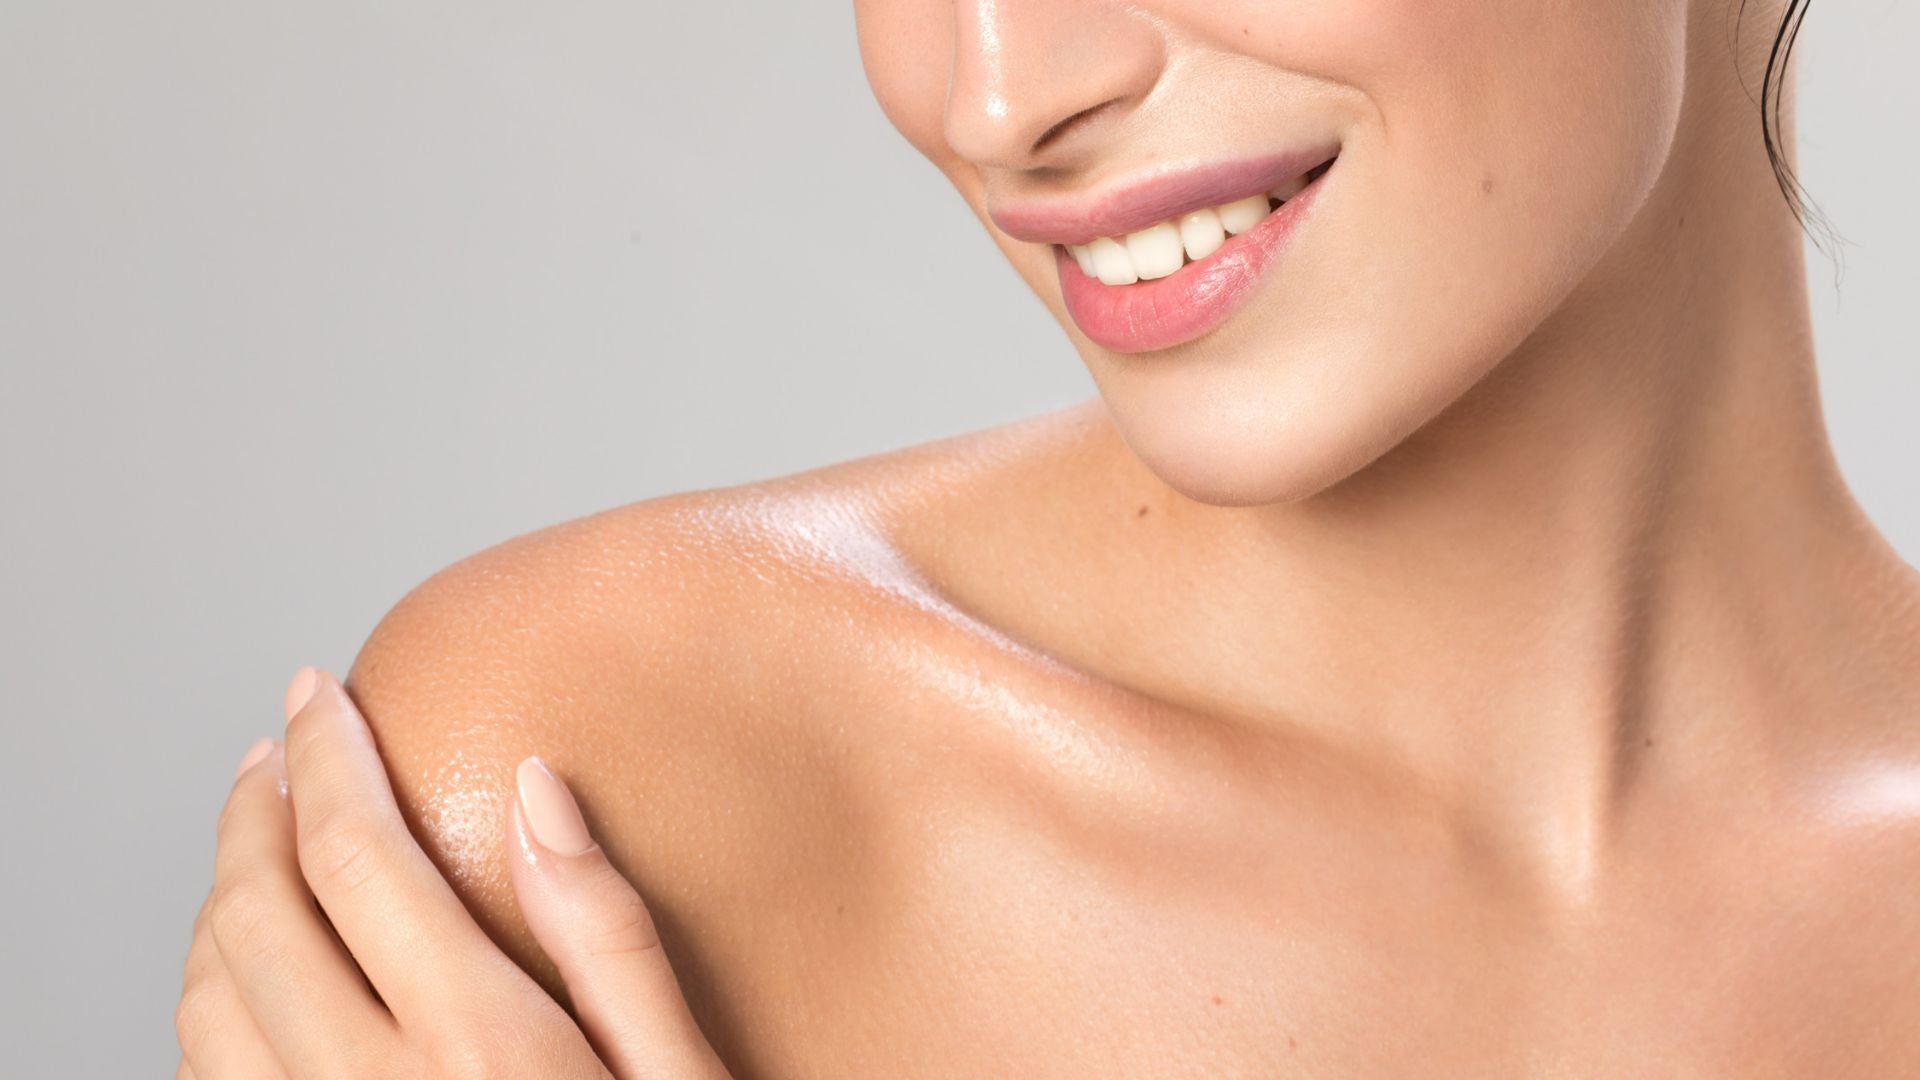 Yes, Body Care is as important as Skin Care